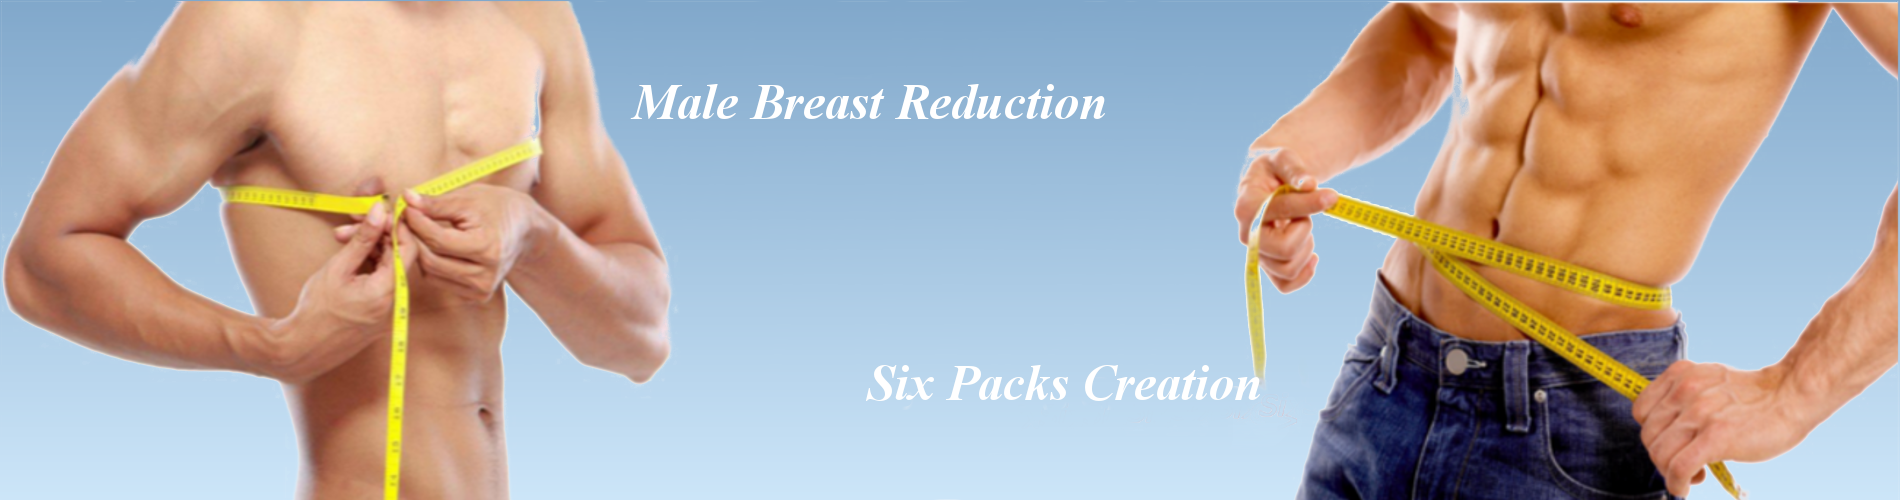 male breast creation six pack creation